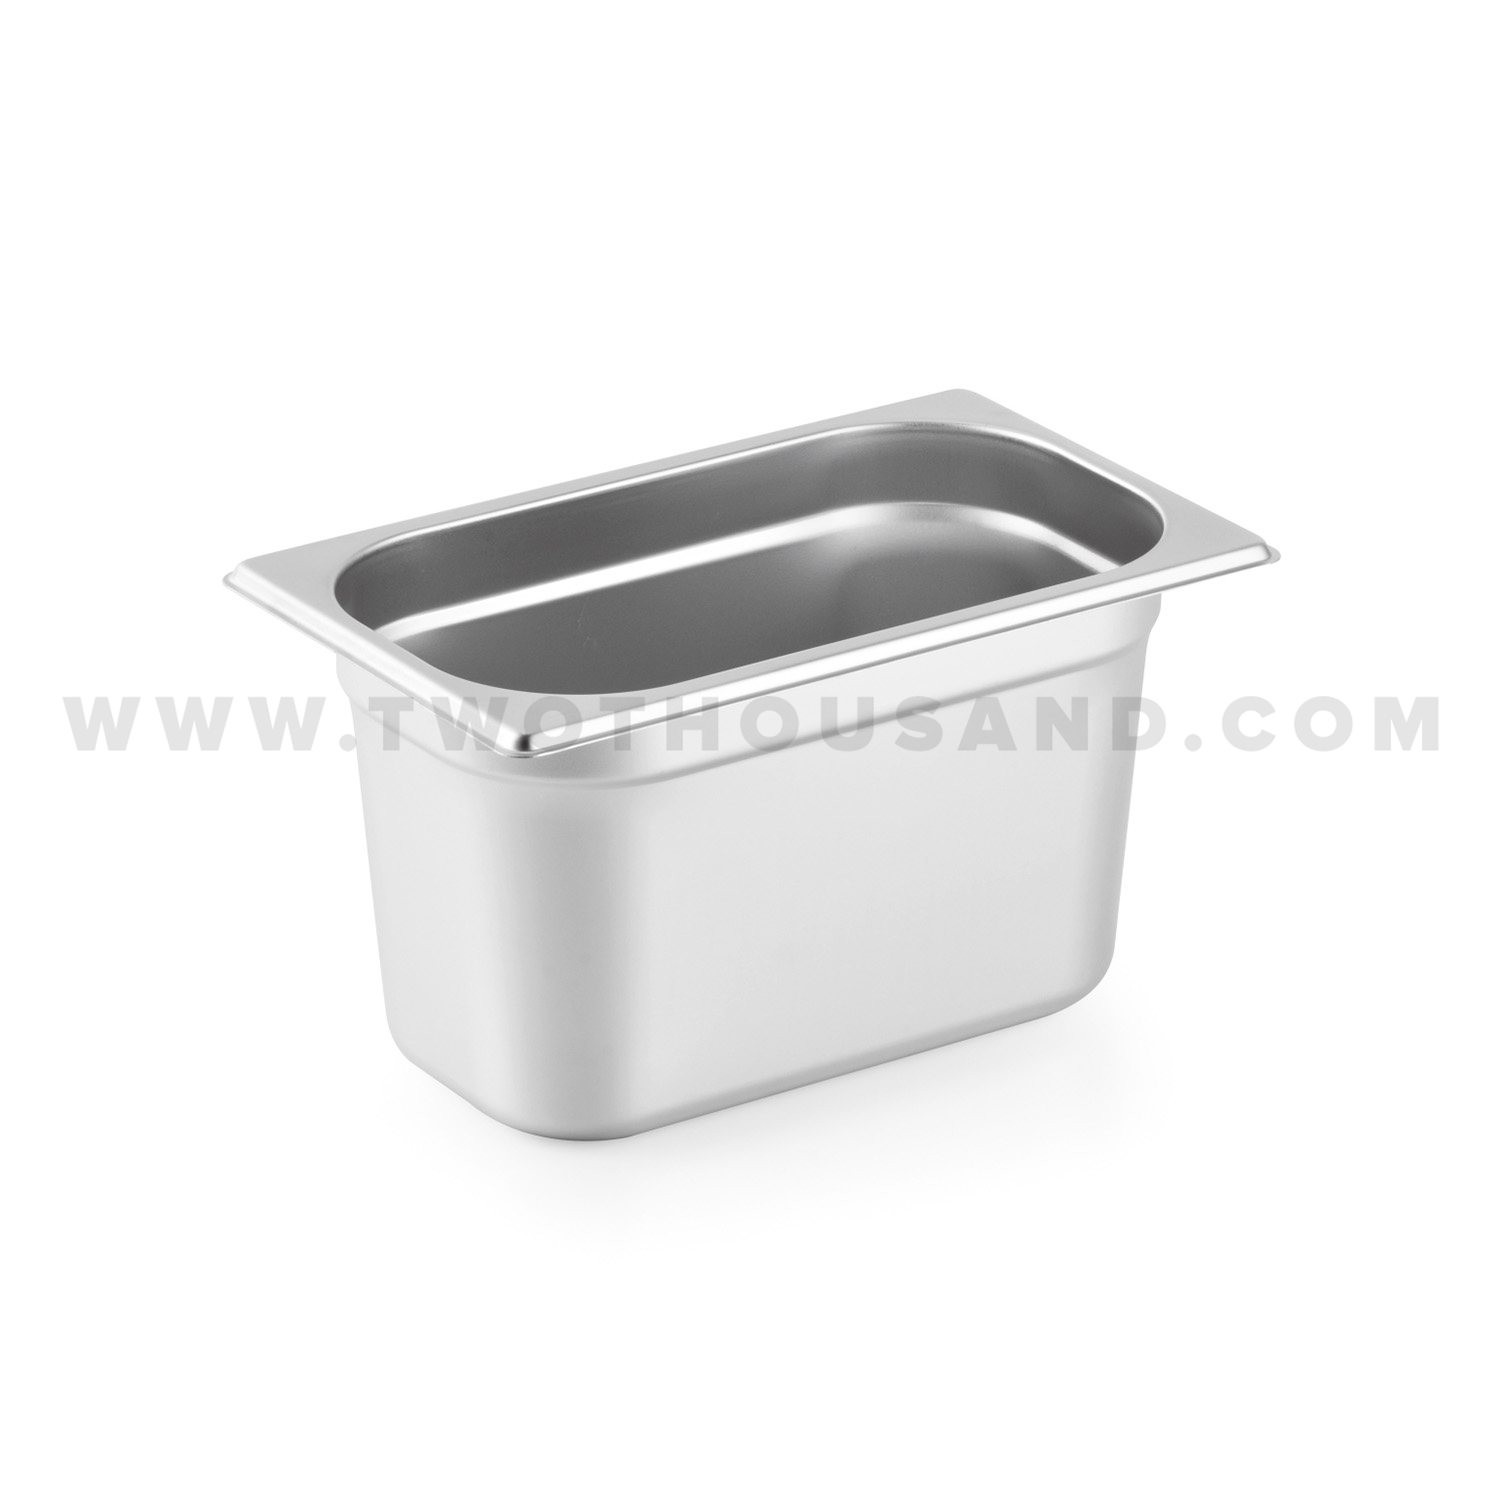 Stainless Steel Steam Table Pan TT-814-6 - Main View